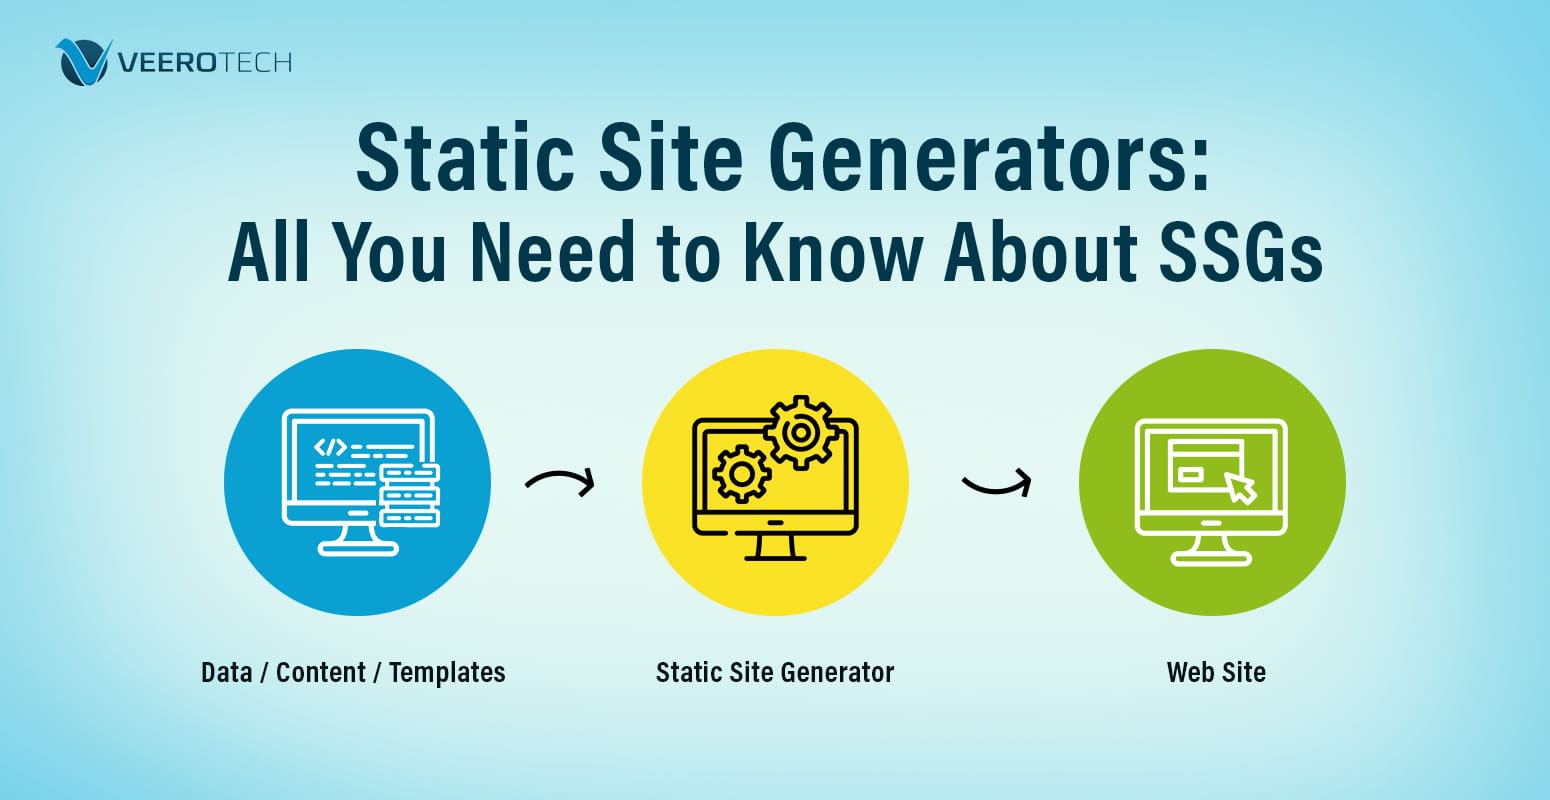 Static Site Generators: All You Need to Know About SSGs